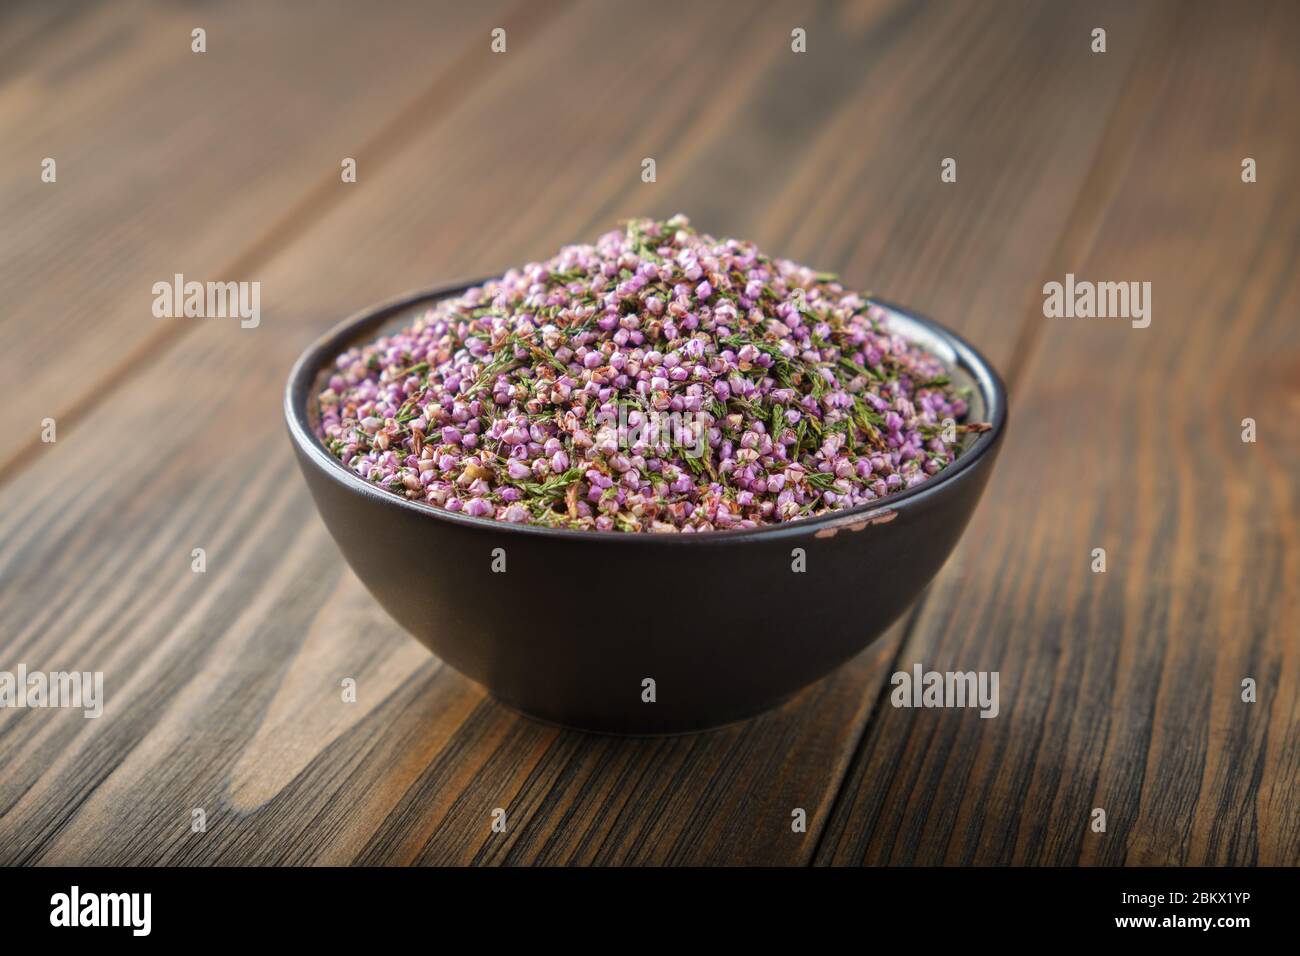 Black bowl of dry healthy heather flowers on wooden table. Stock Photo